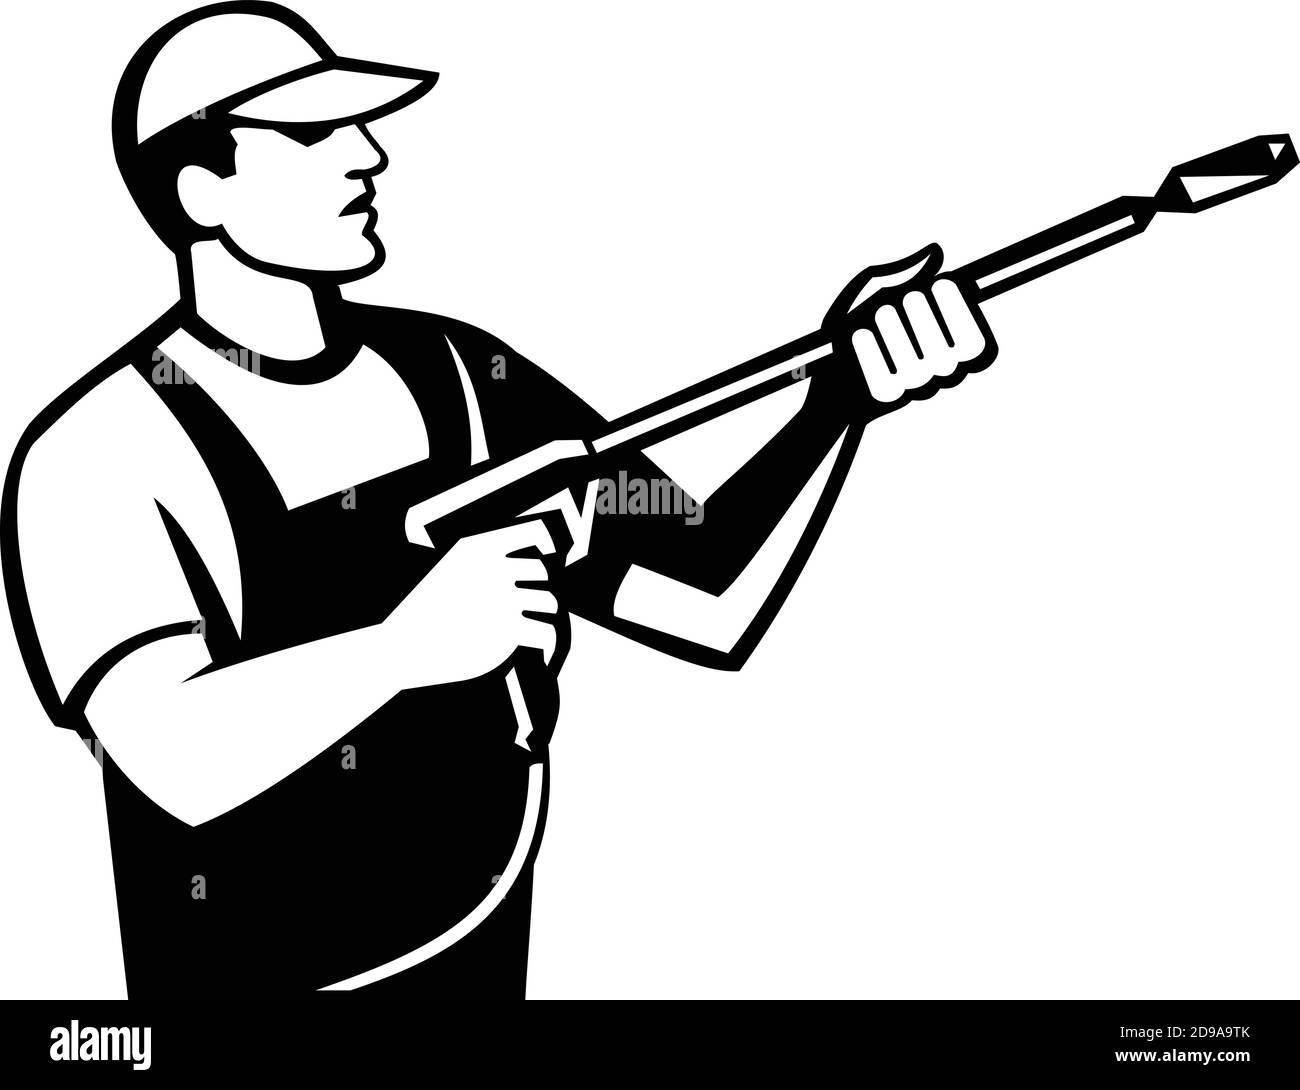 Illustration of a worker with water blaster pressure power washing sprayer spraying viewed from side done in retro black and white style. Stock Vector